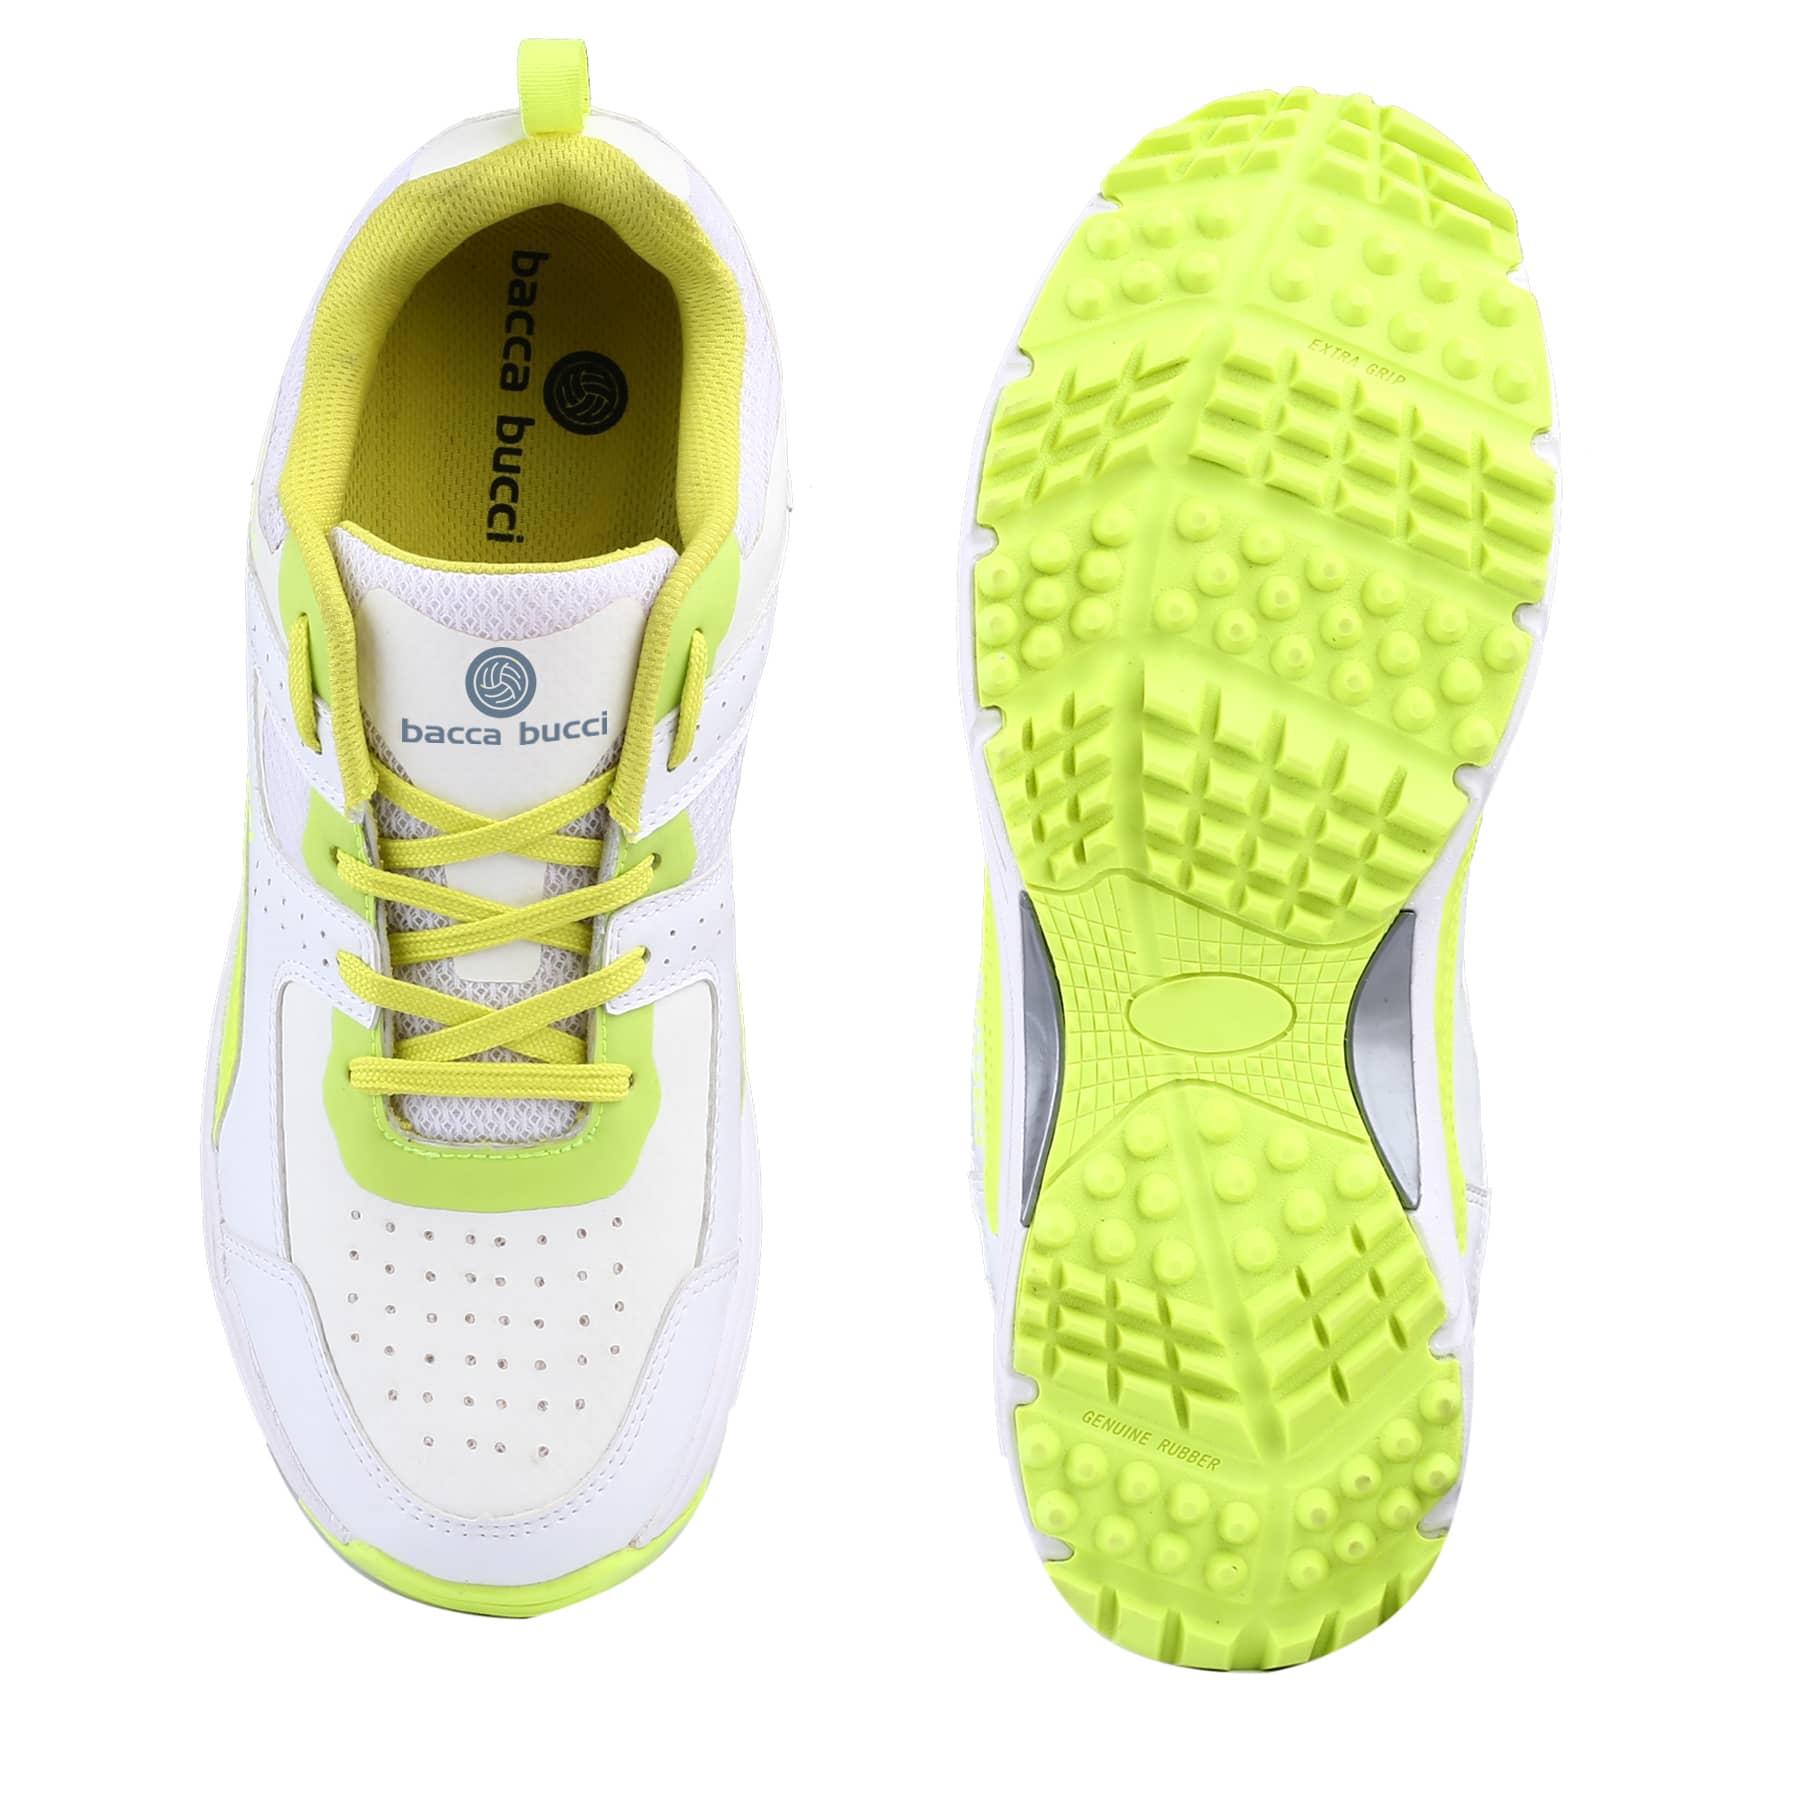 Bacca Bucci WicketWings Pro Performance Cricket Shoes: Dynamic FlexFit Design, Superior Traction Cleats, Breathable Perforated Upper